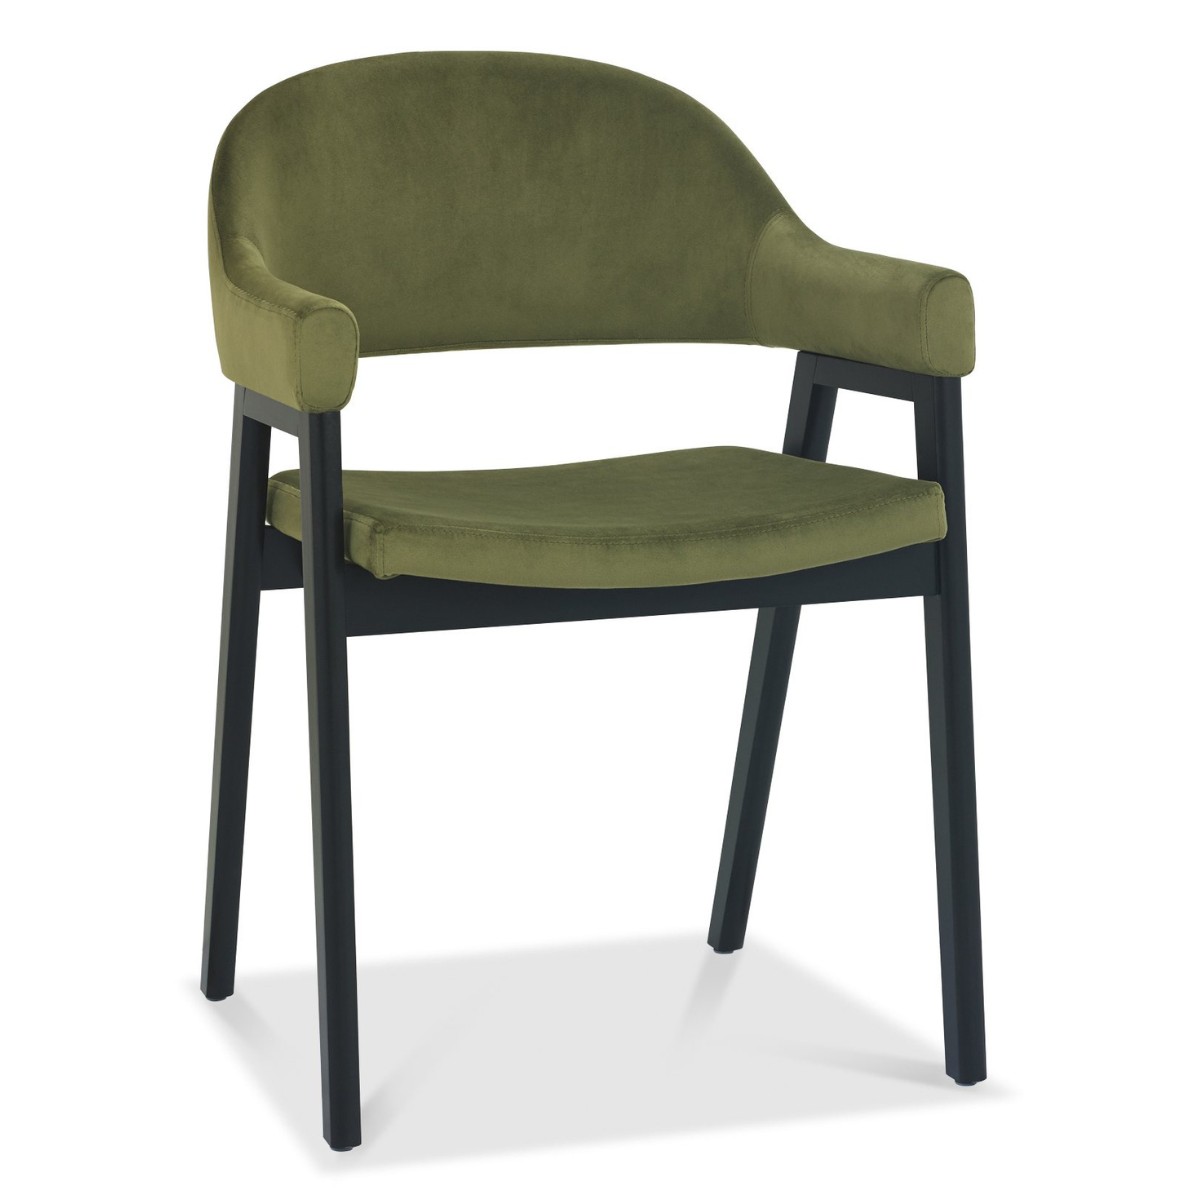 Chambery Weathered Oak Carver Dining Chair Green- 1